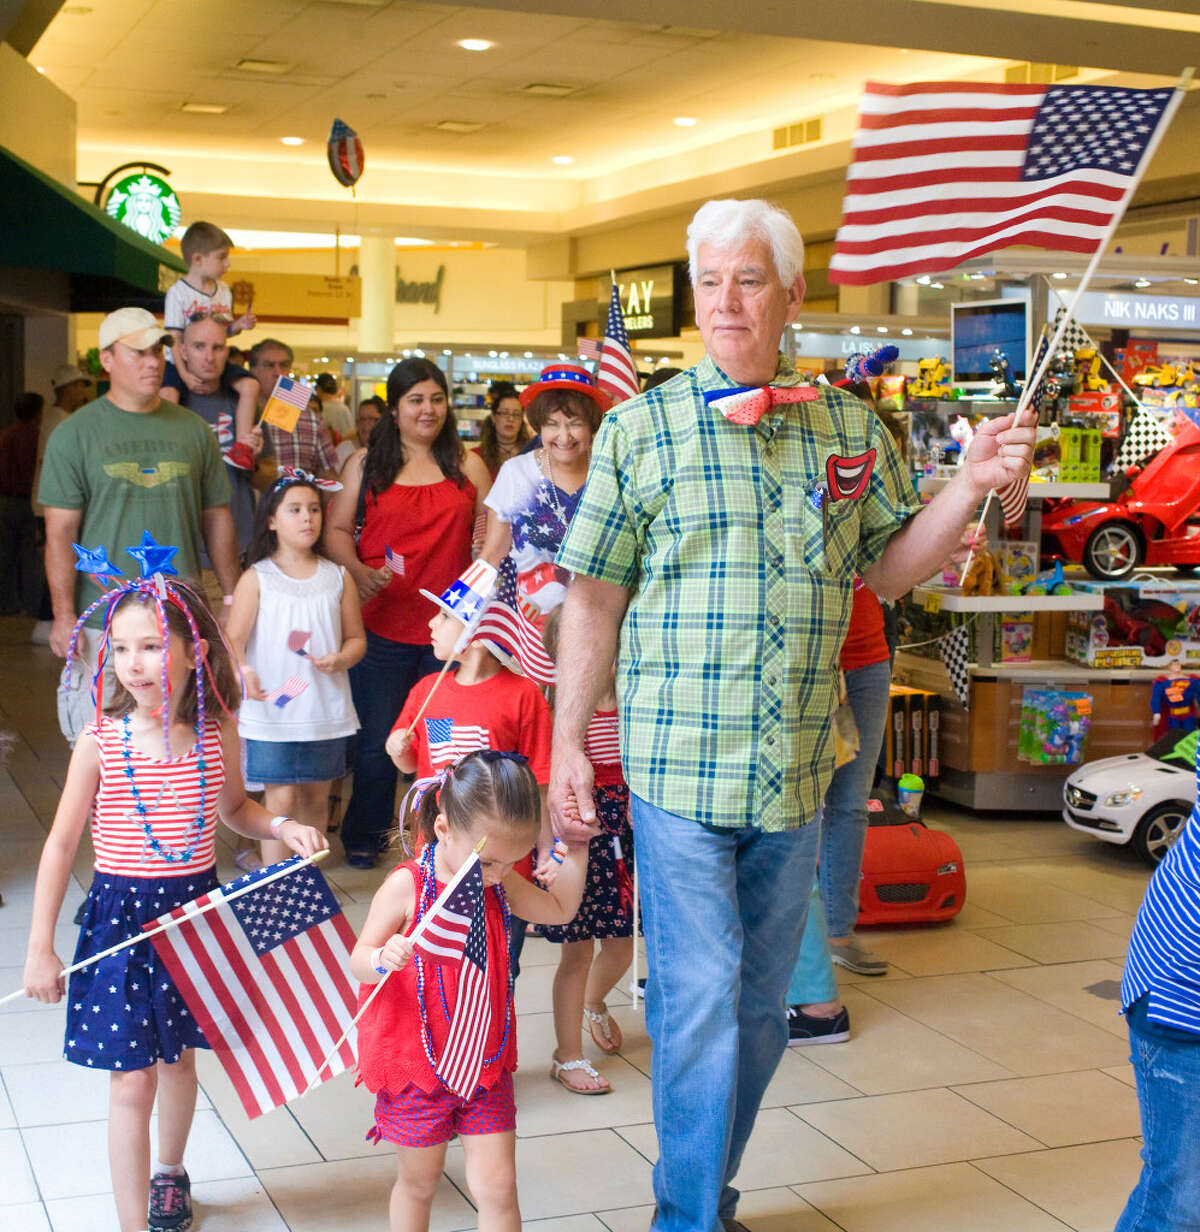 Local families dressed in patriotic attire march their way through a children's 4th of July parade hosted by the Imaginarium of South Texas at Mall Del Norte on Tuesday afternoon.